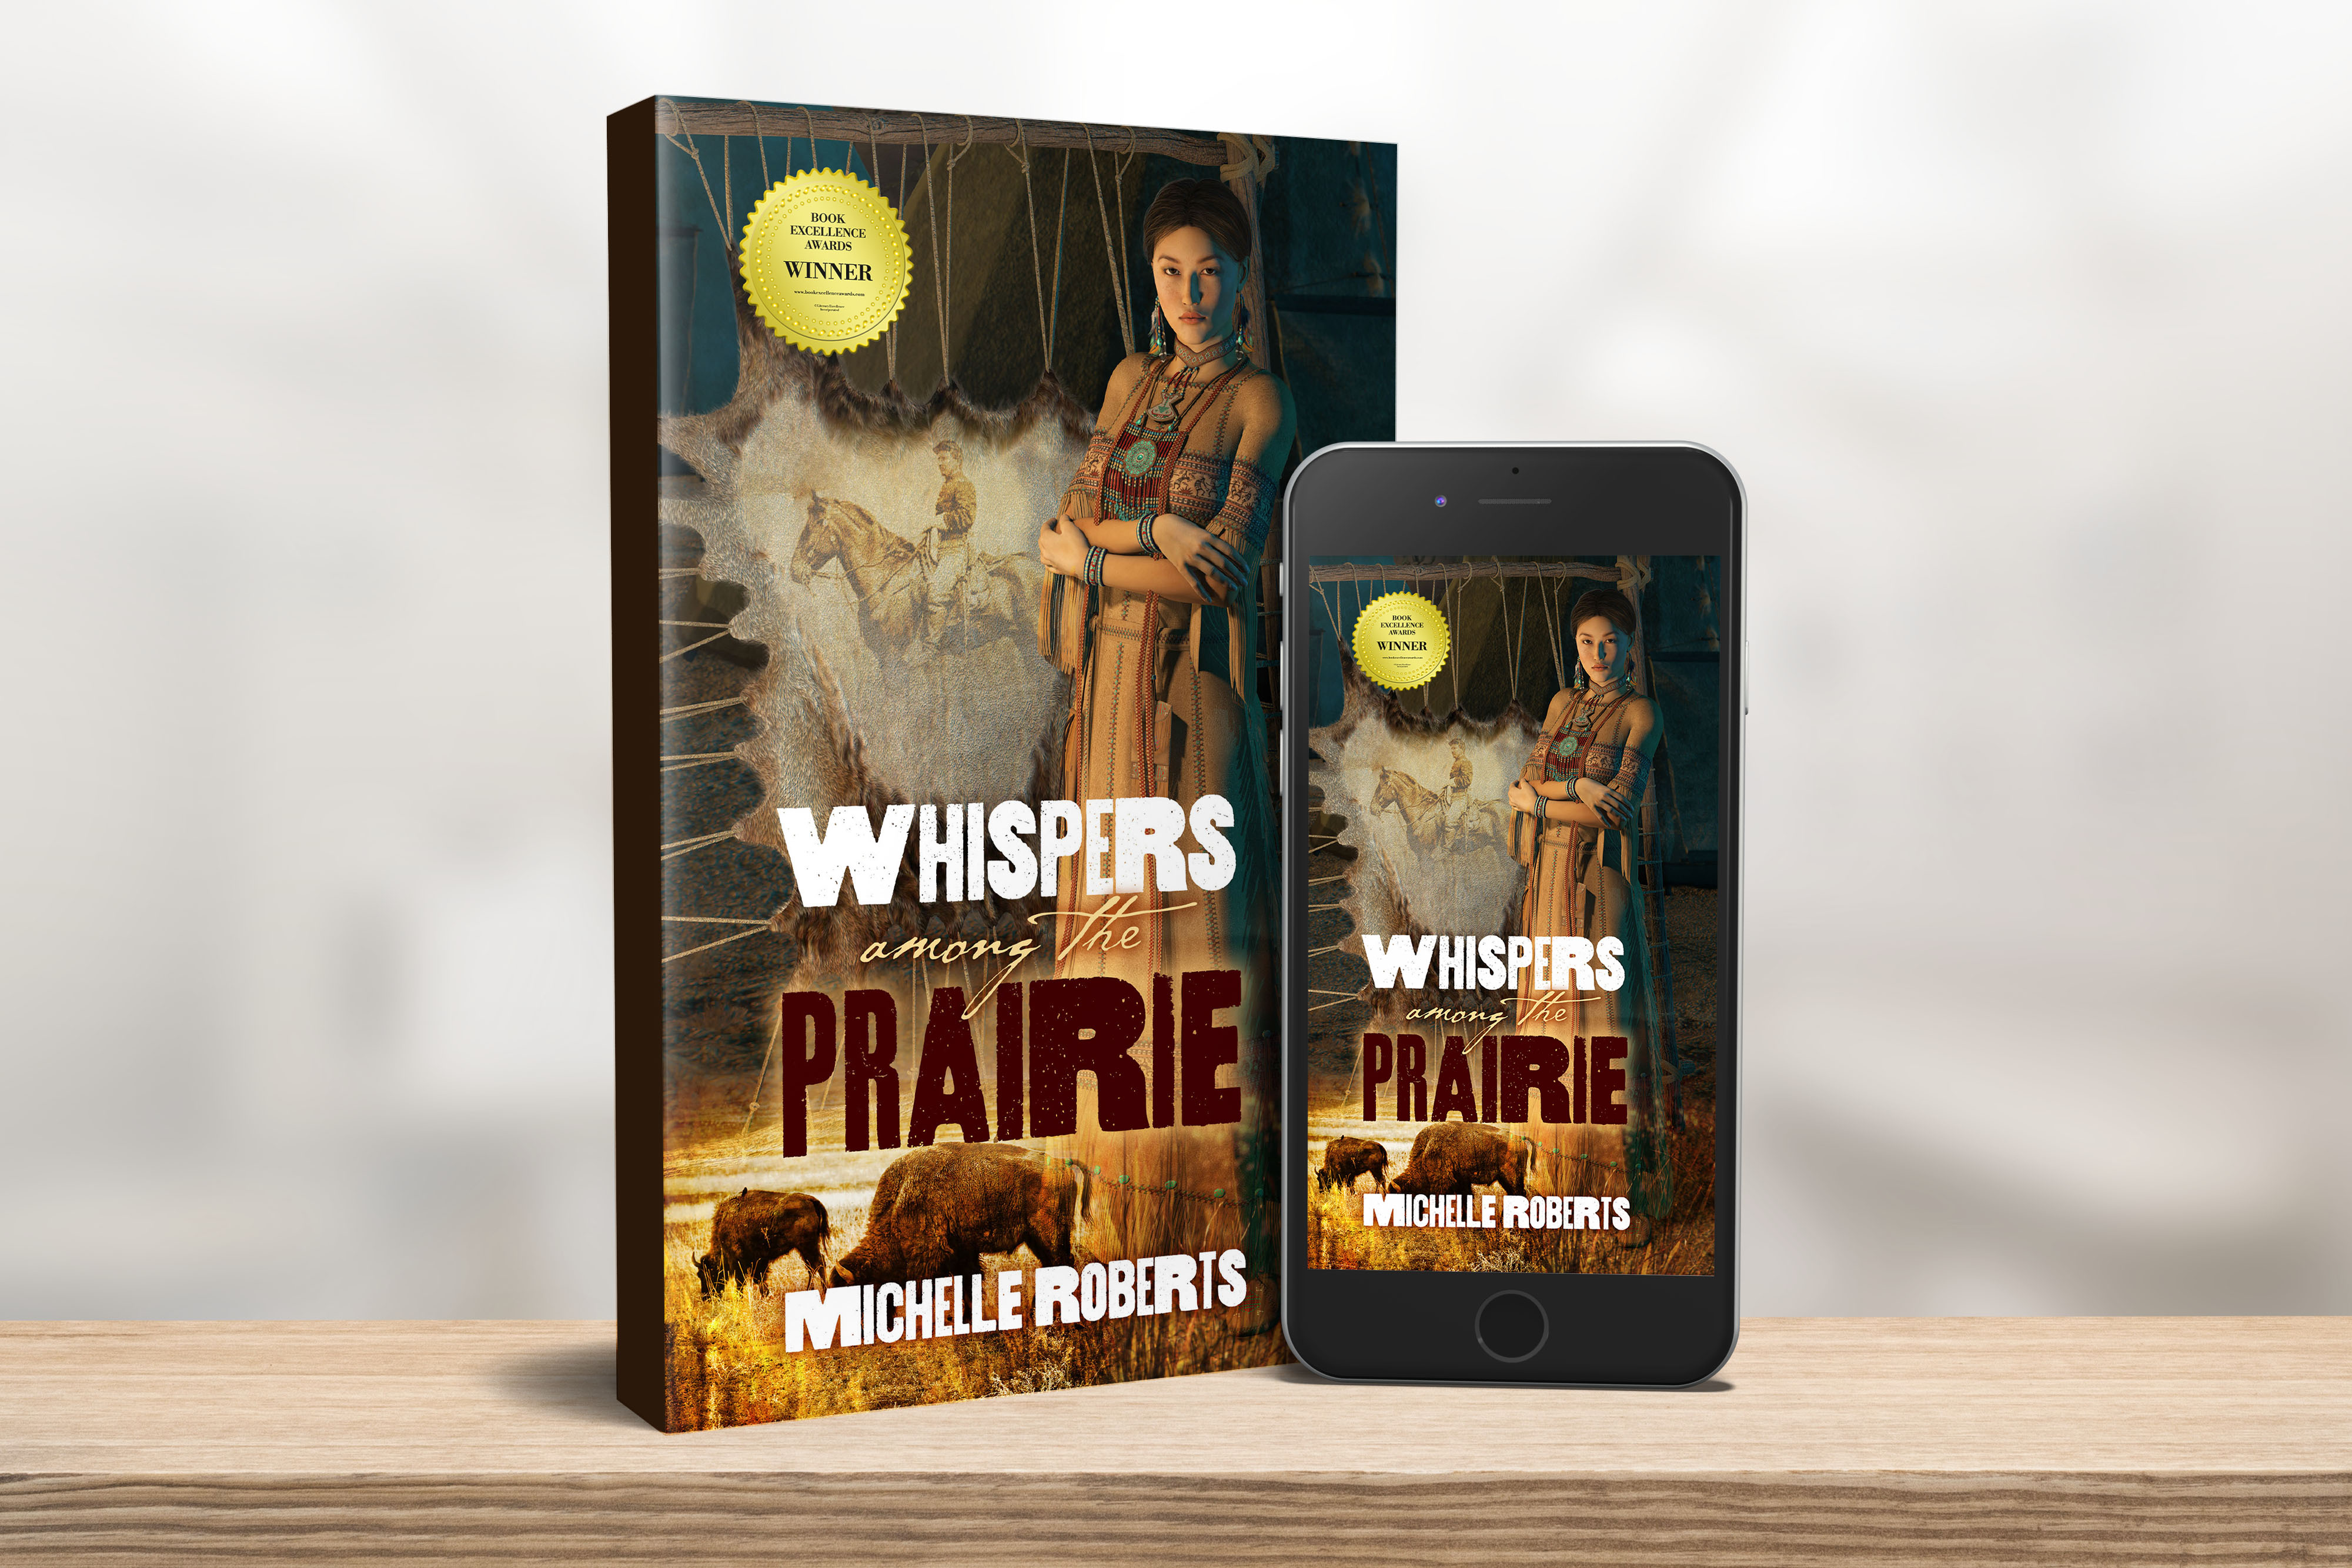 Michelle Roberts’ Whispers Among The Prairie is a Compelling Historical Romance that Highlights Authentic Cheyenne History